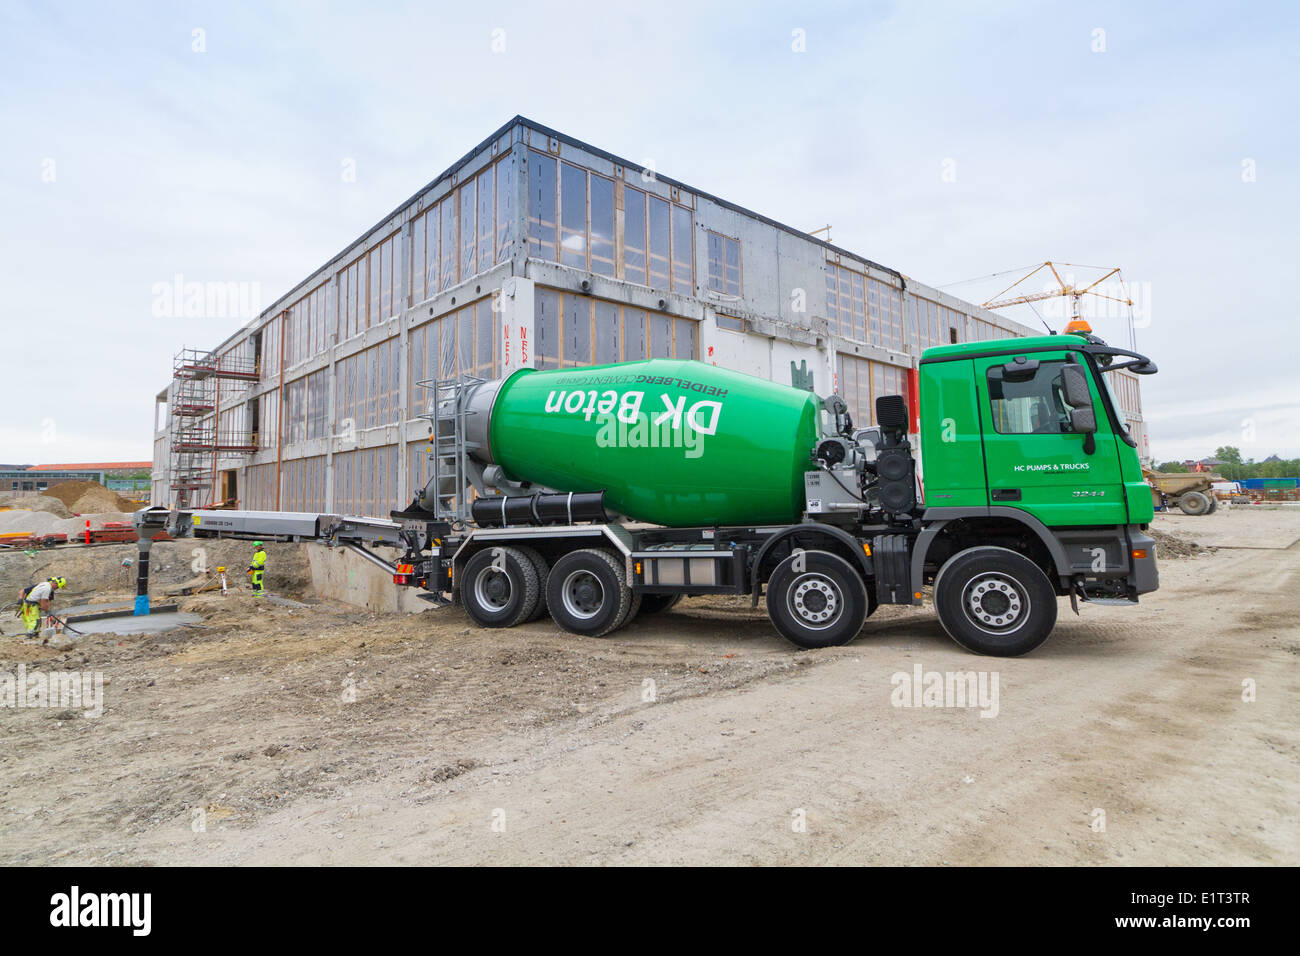 Concrete Truck High Resolution Stock Photography and Images - Alamy